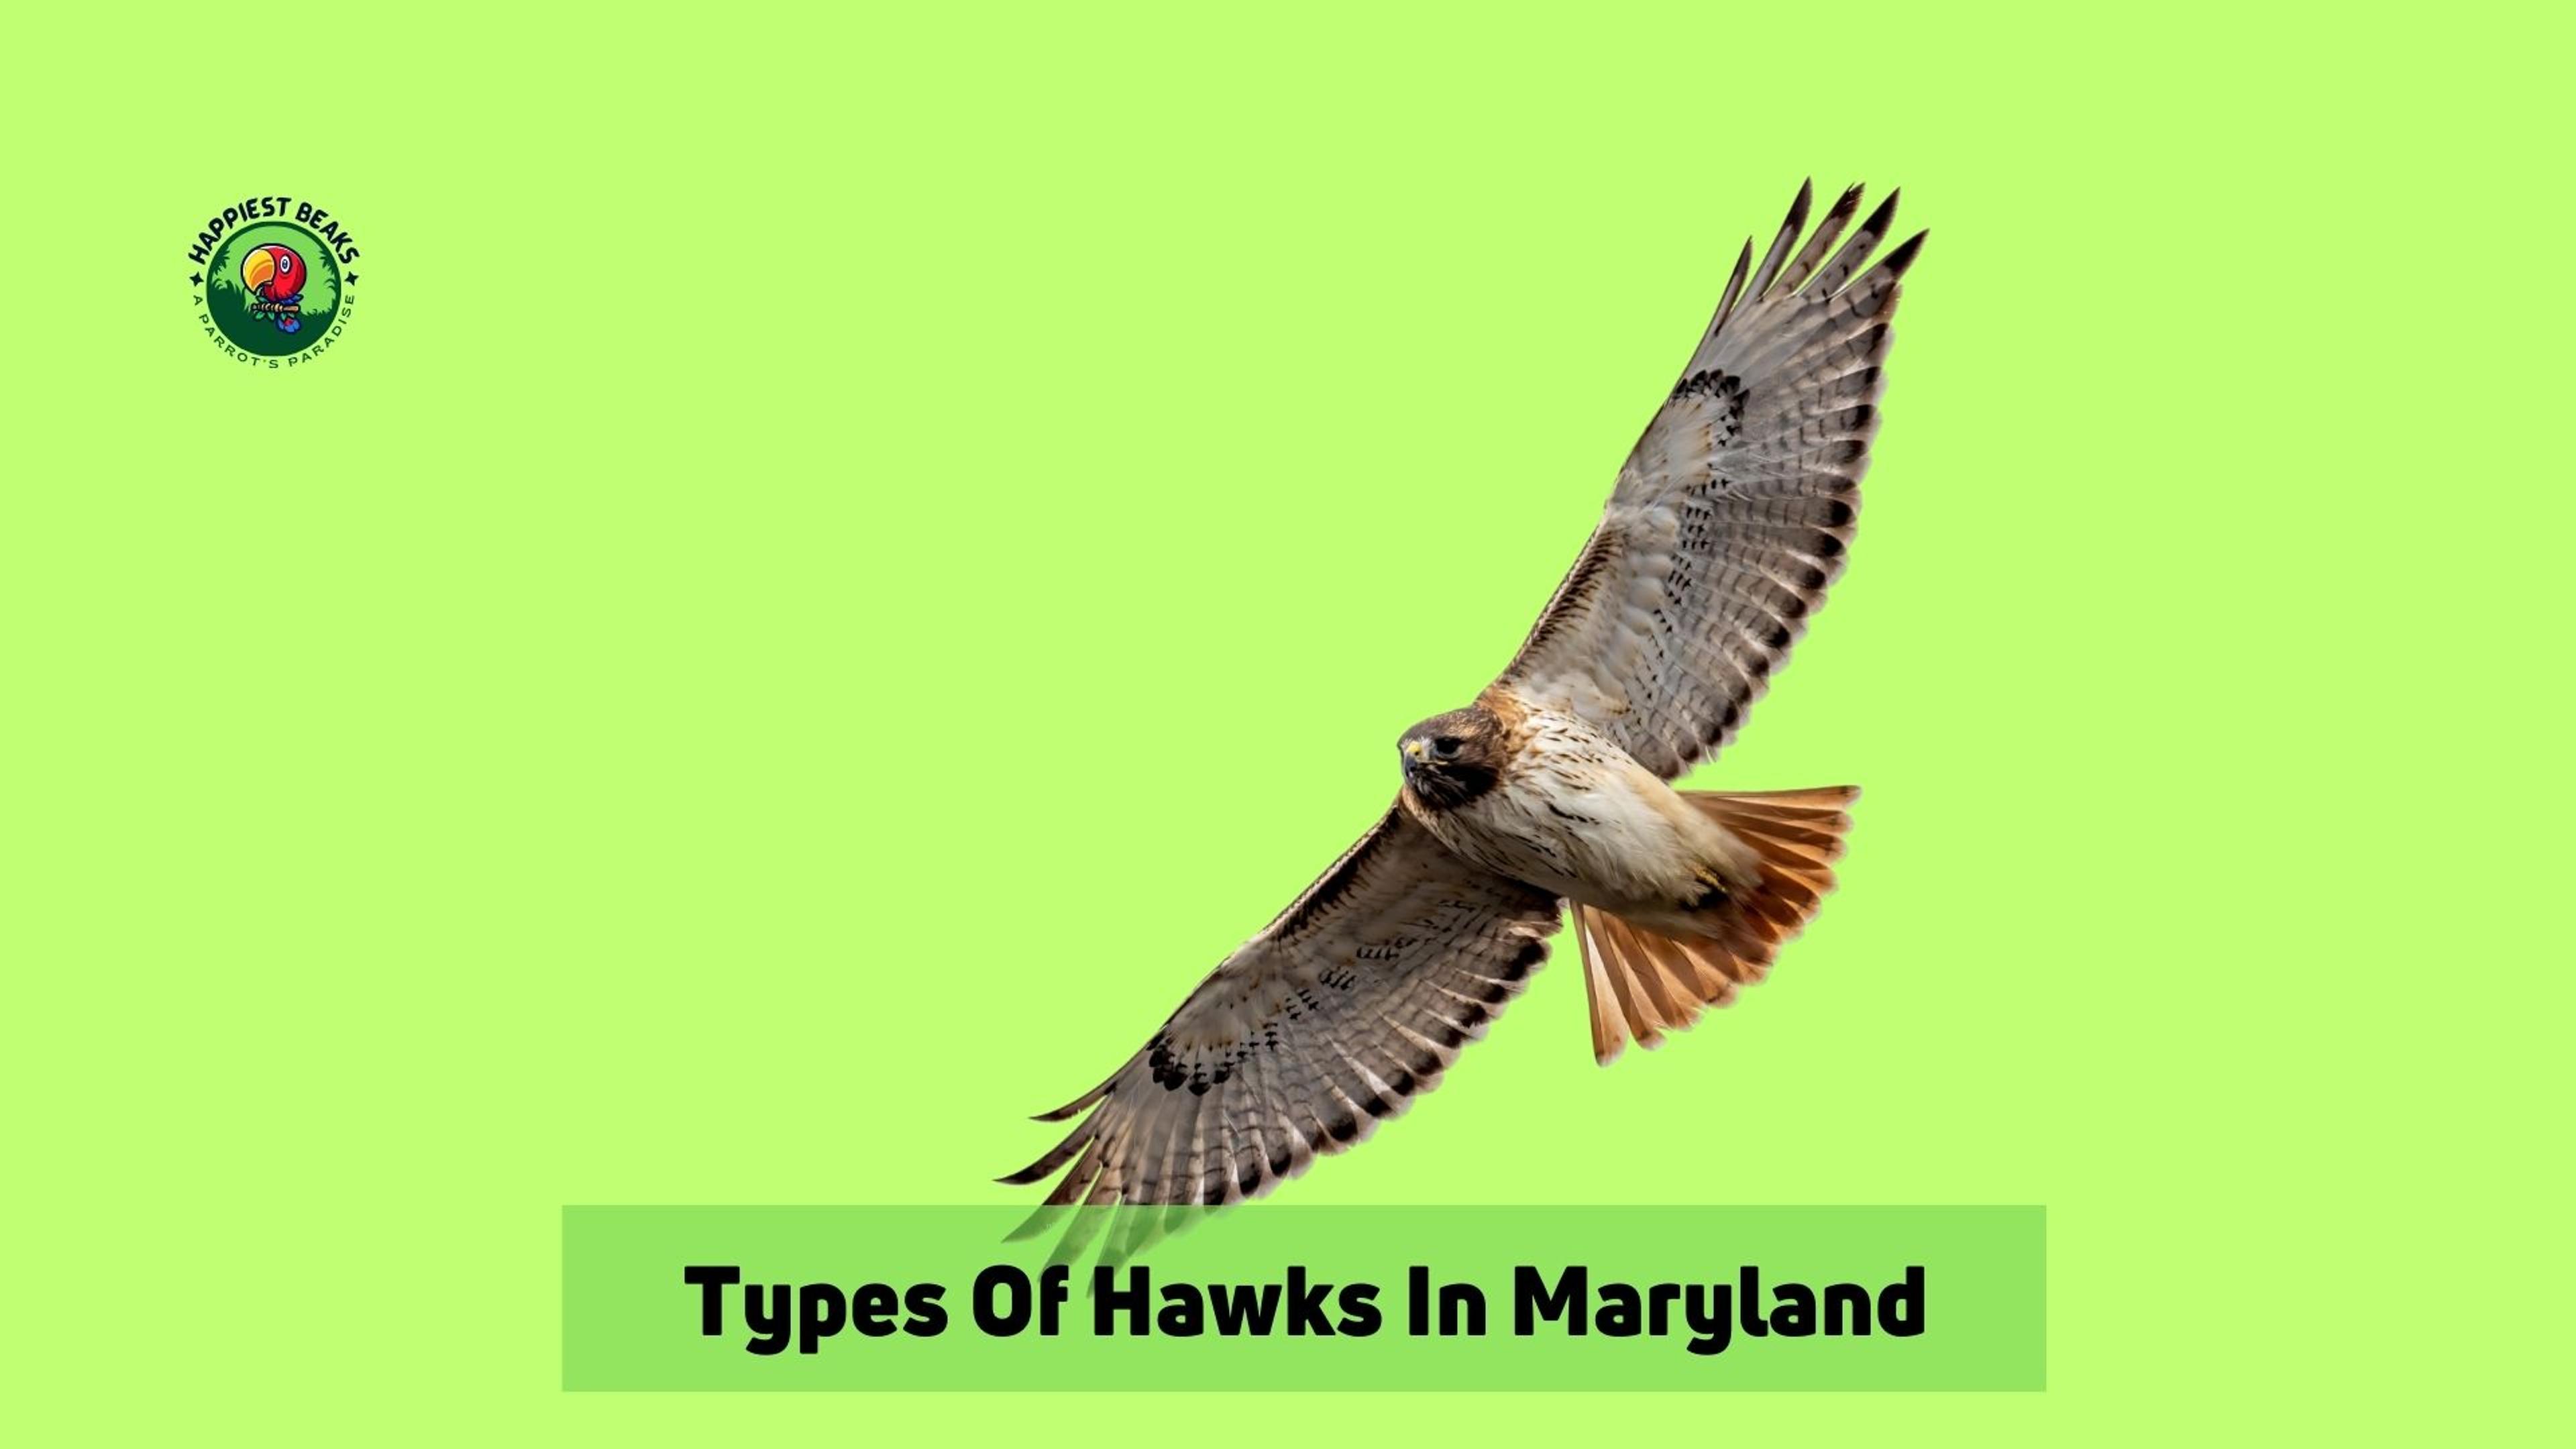 Types of Hawks in Maryland